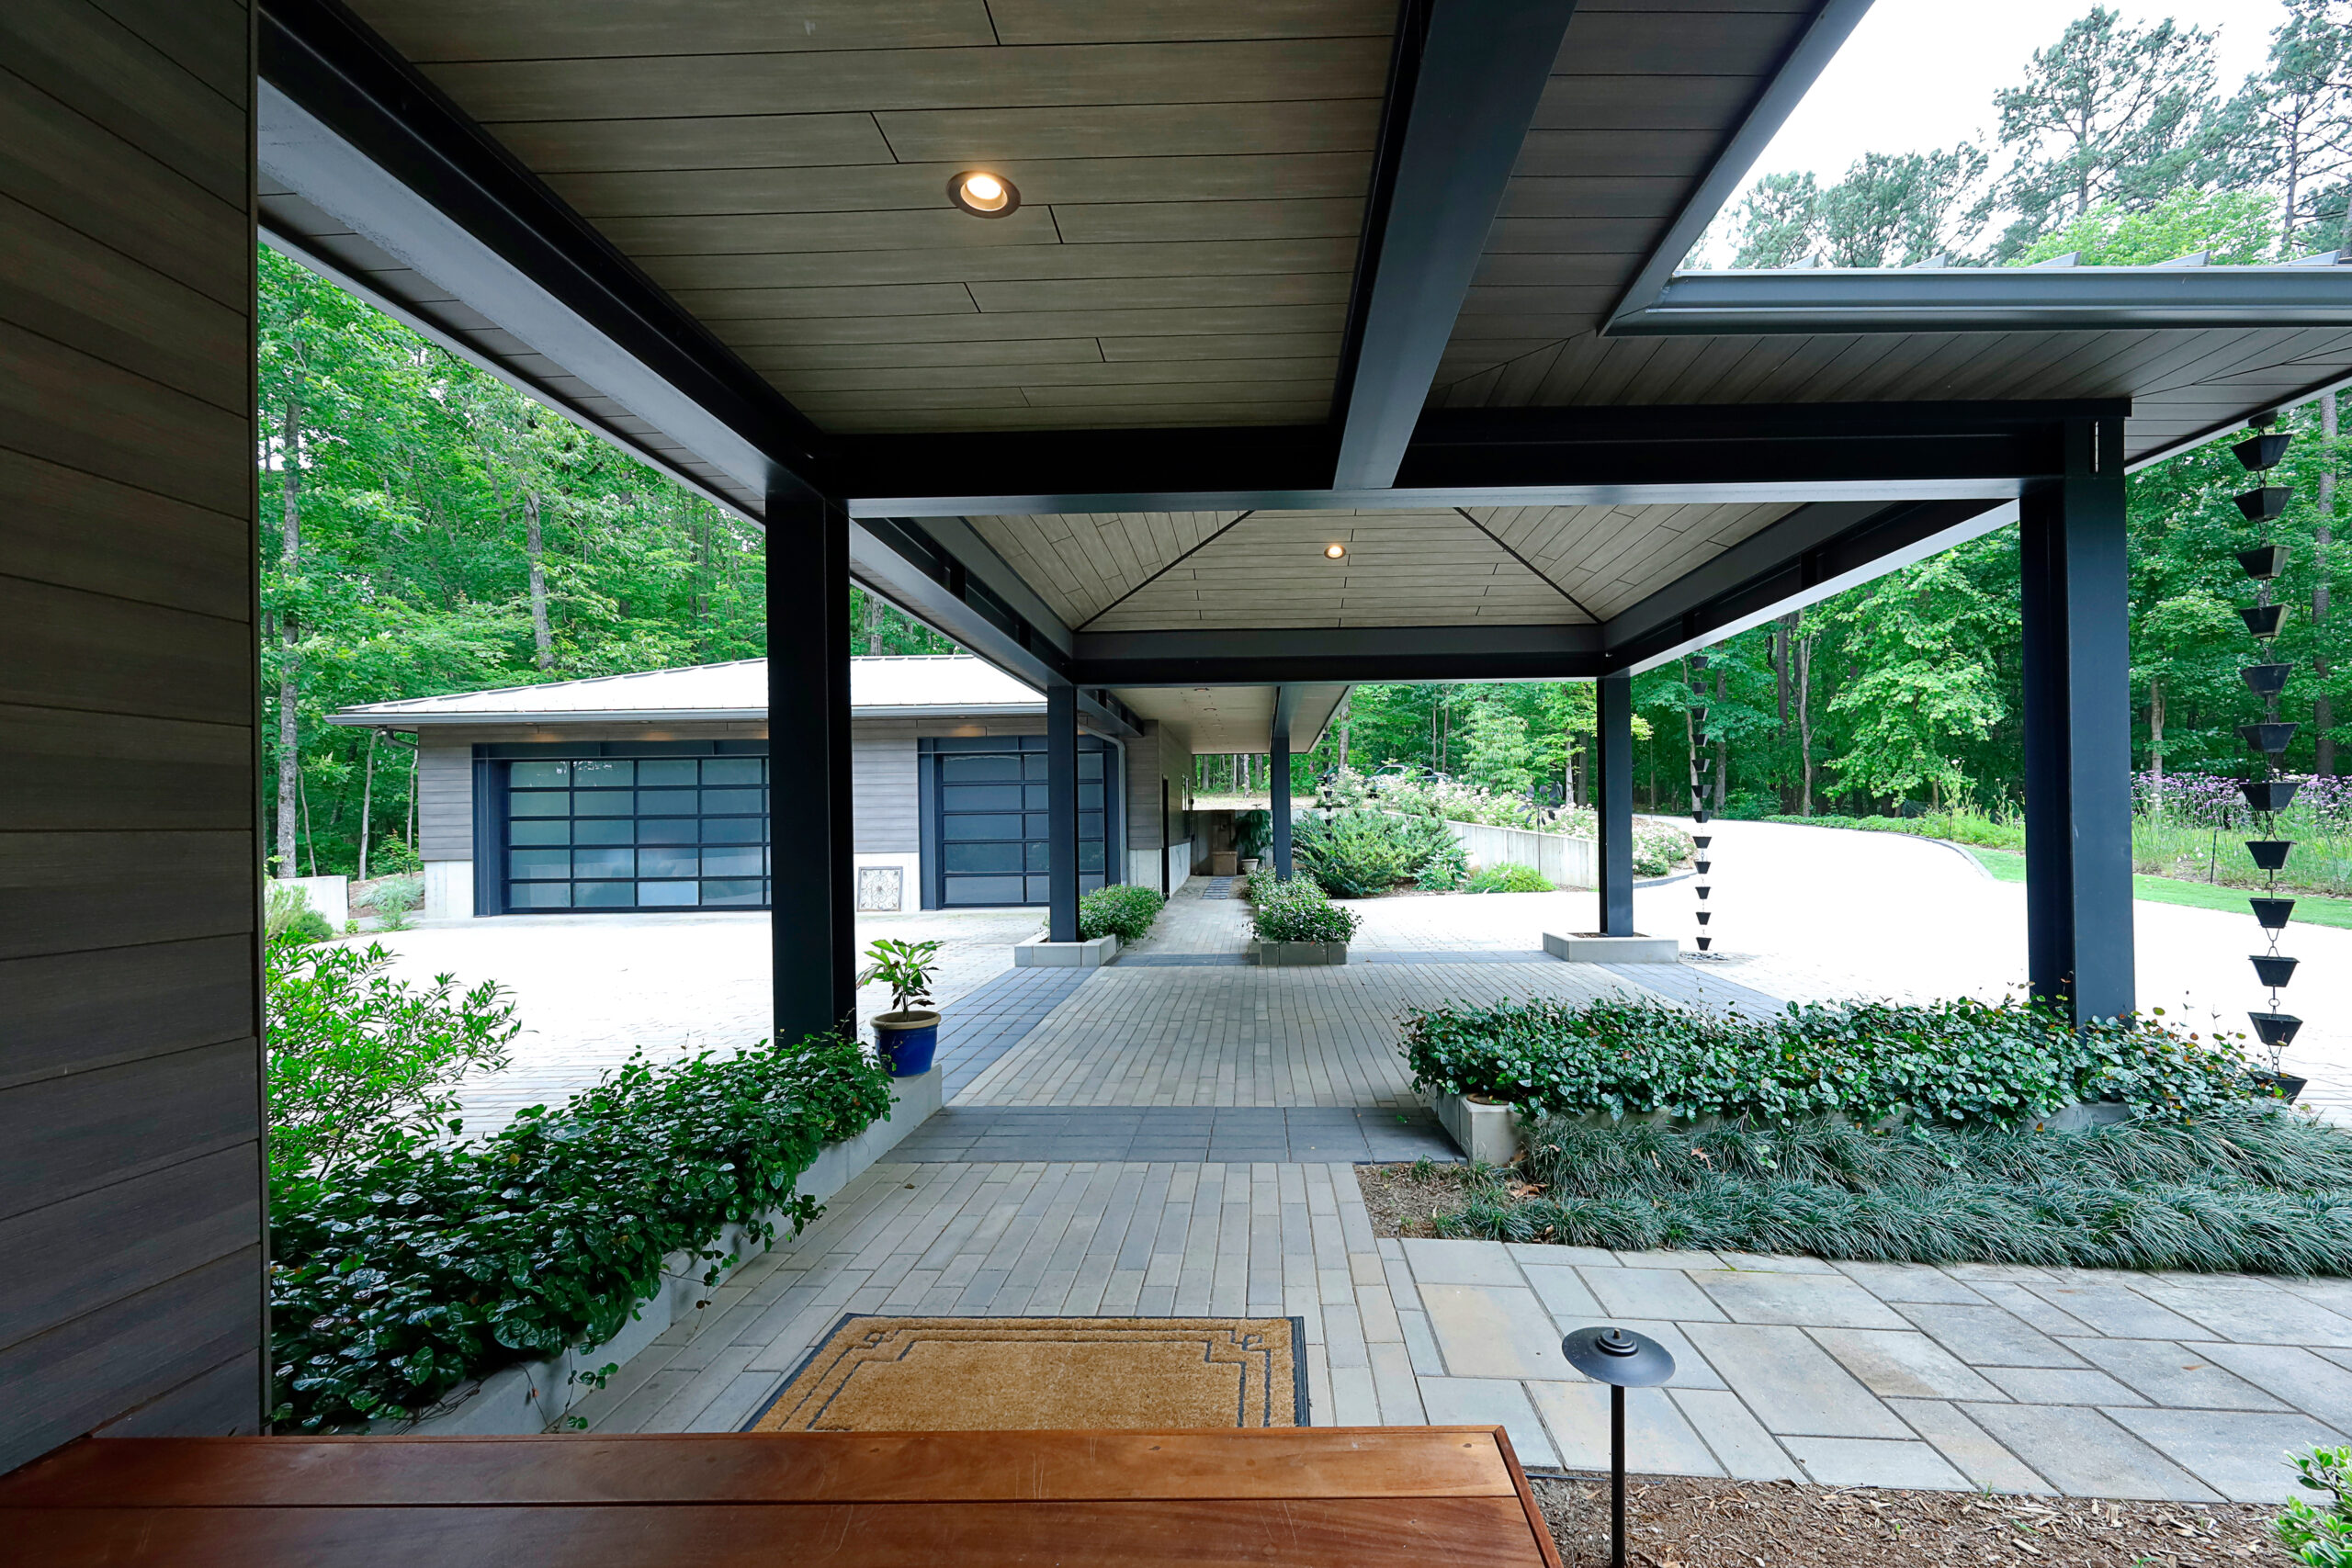 The porte cochere and breezeway, a series of roofed forms is articulated by heavy steel columns and beams.